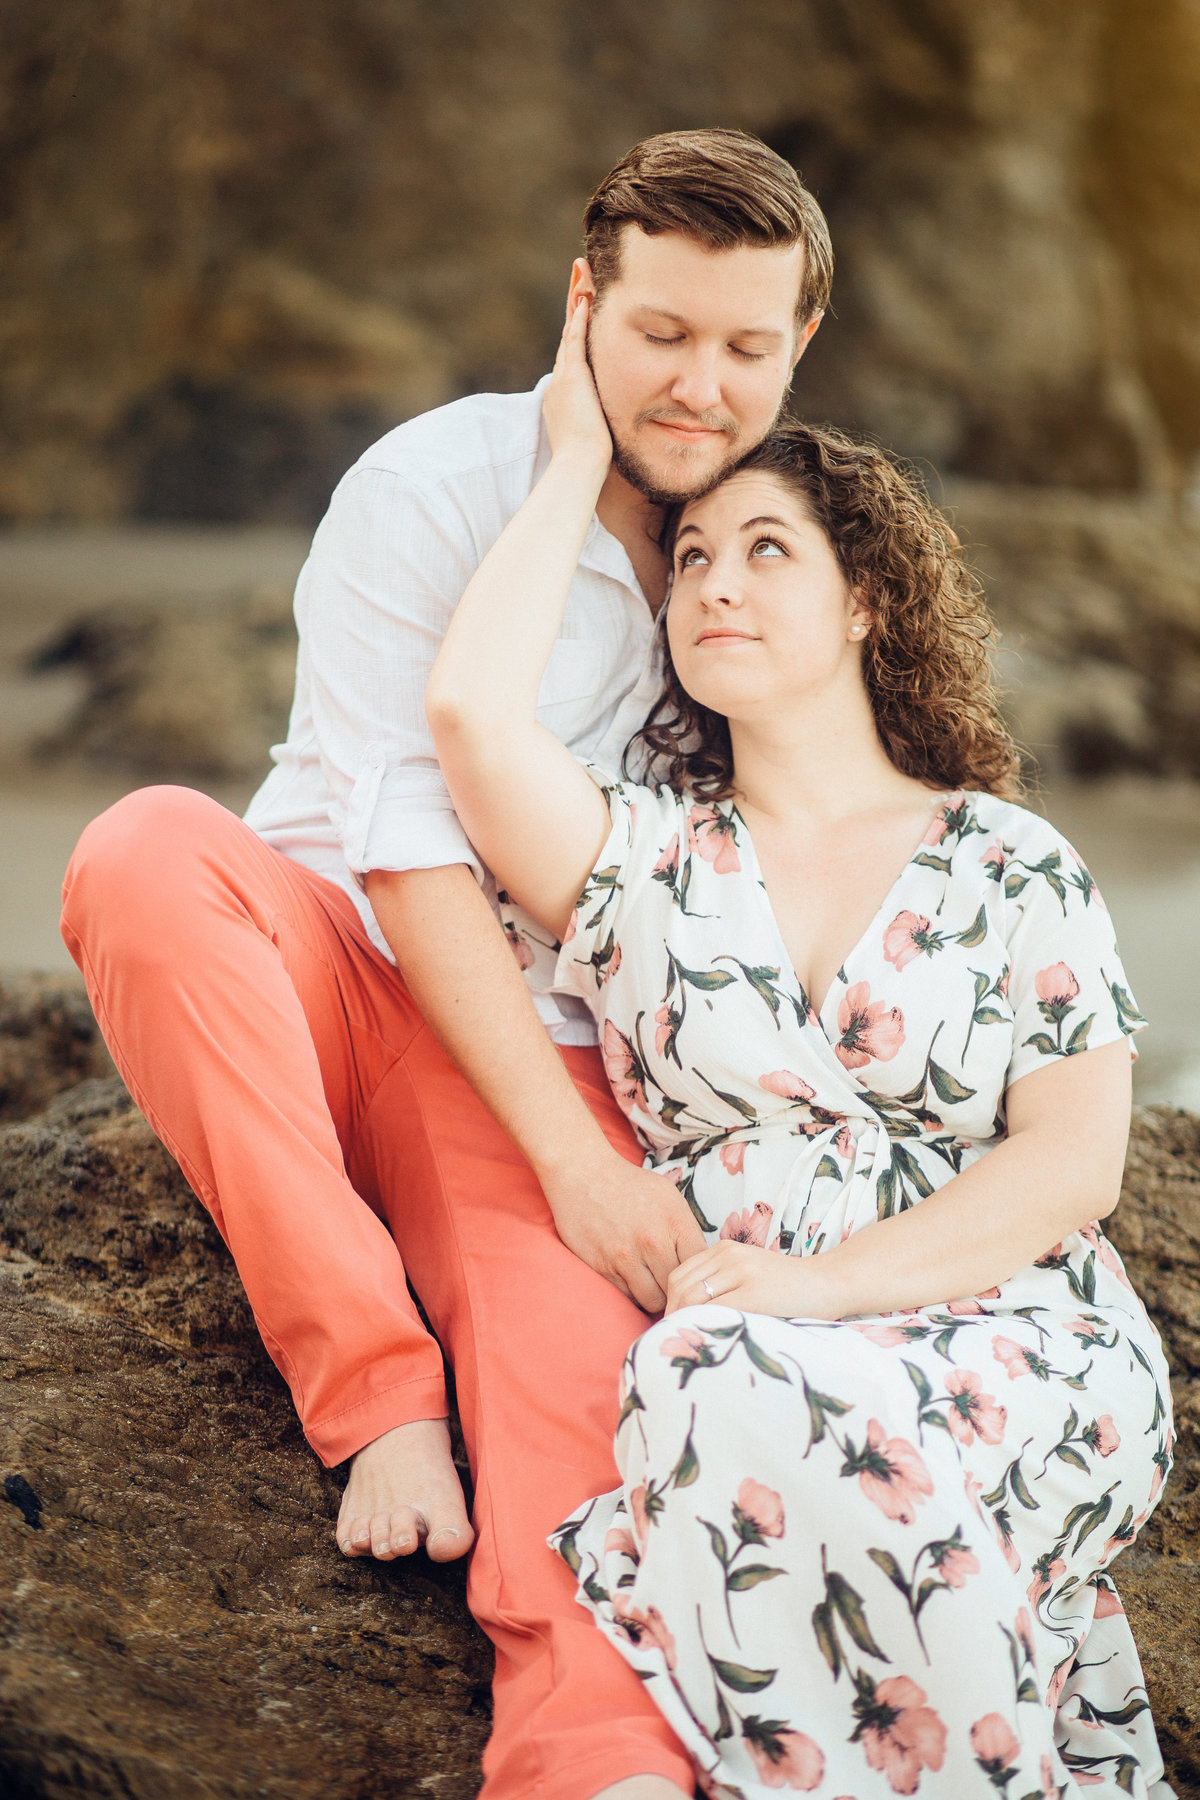 Engagement Photograph Of  Man  In Orange Slacks And Woman In Floral Dress Los Angeles